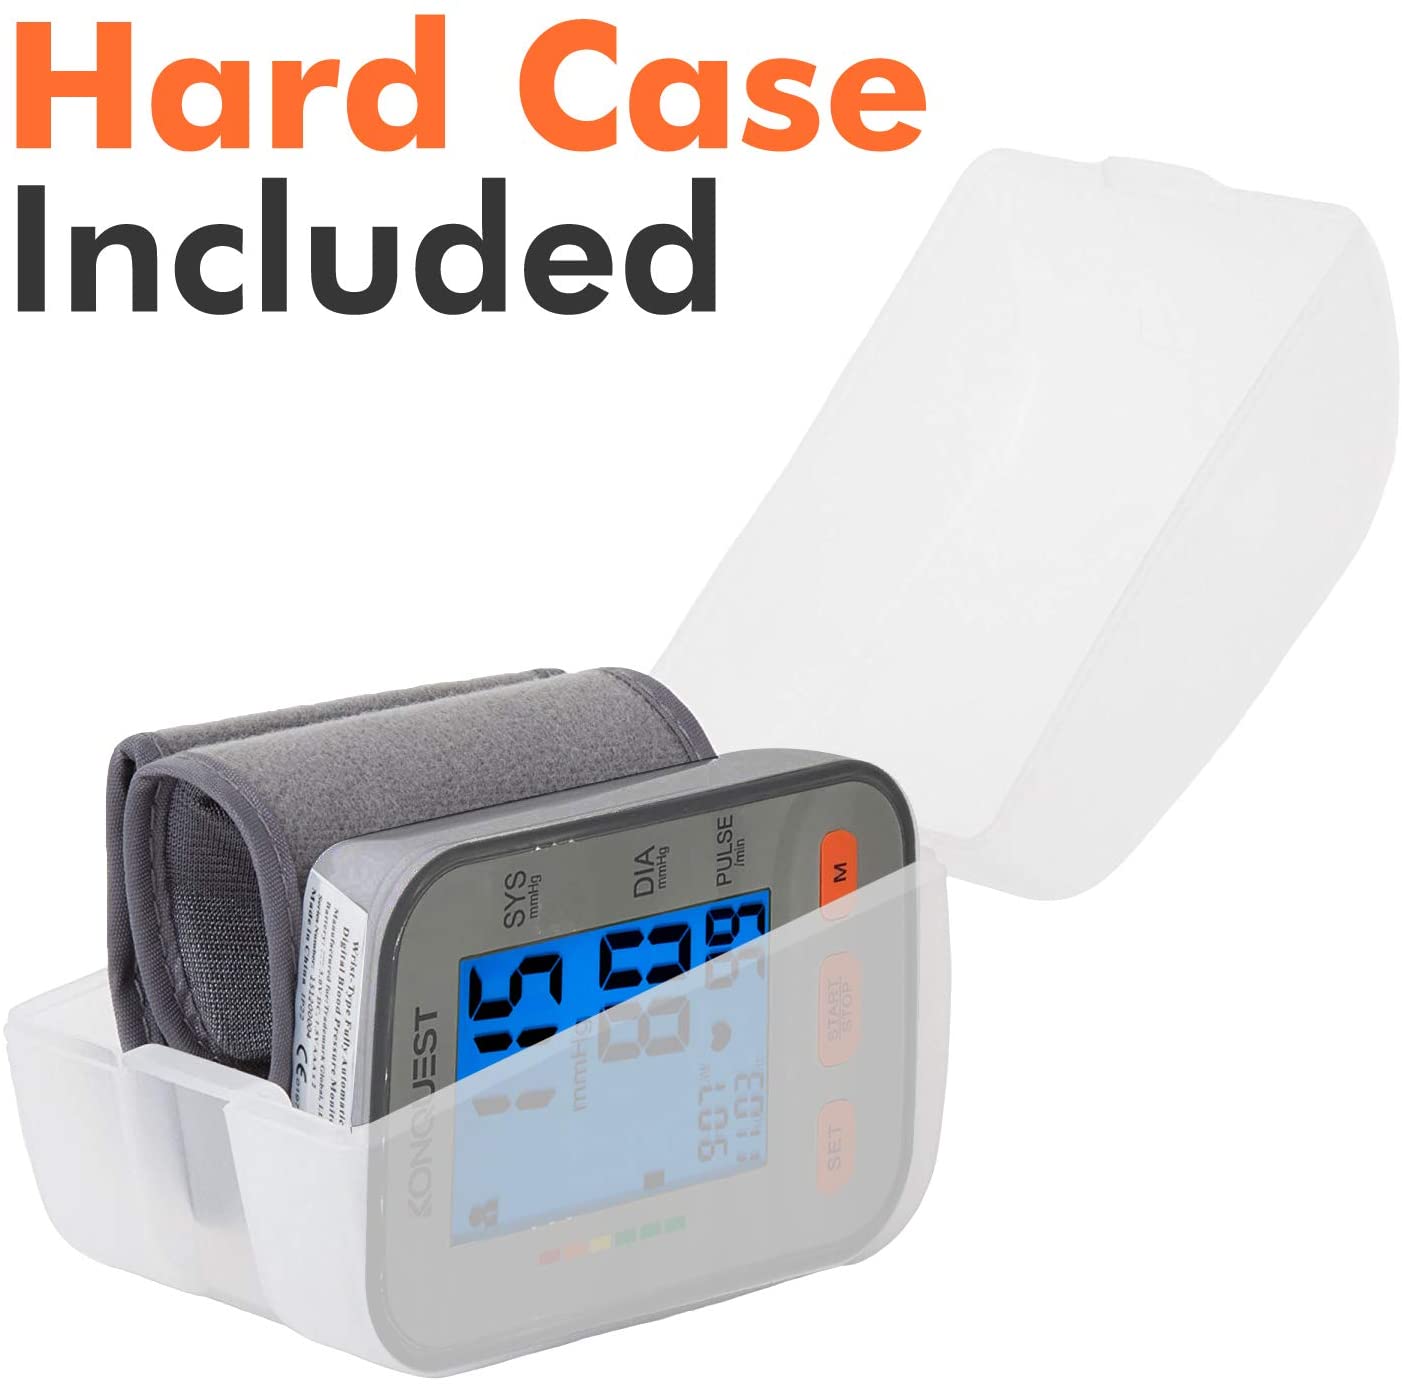 Konquest - 📣NEW PRODUCT!!!!!! Konquest KBP-2910W Automatic Wrist Blood  Pressure Monitor - Accurate, FDA Approved - Adjustable Cuff, Large Screen  Display, Portable Case - Irregular Heartbeat & Hypertension Detector . . . #